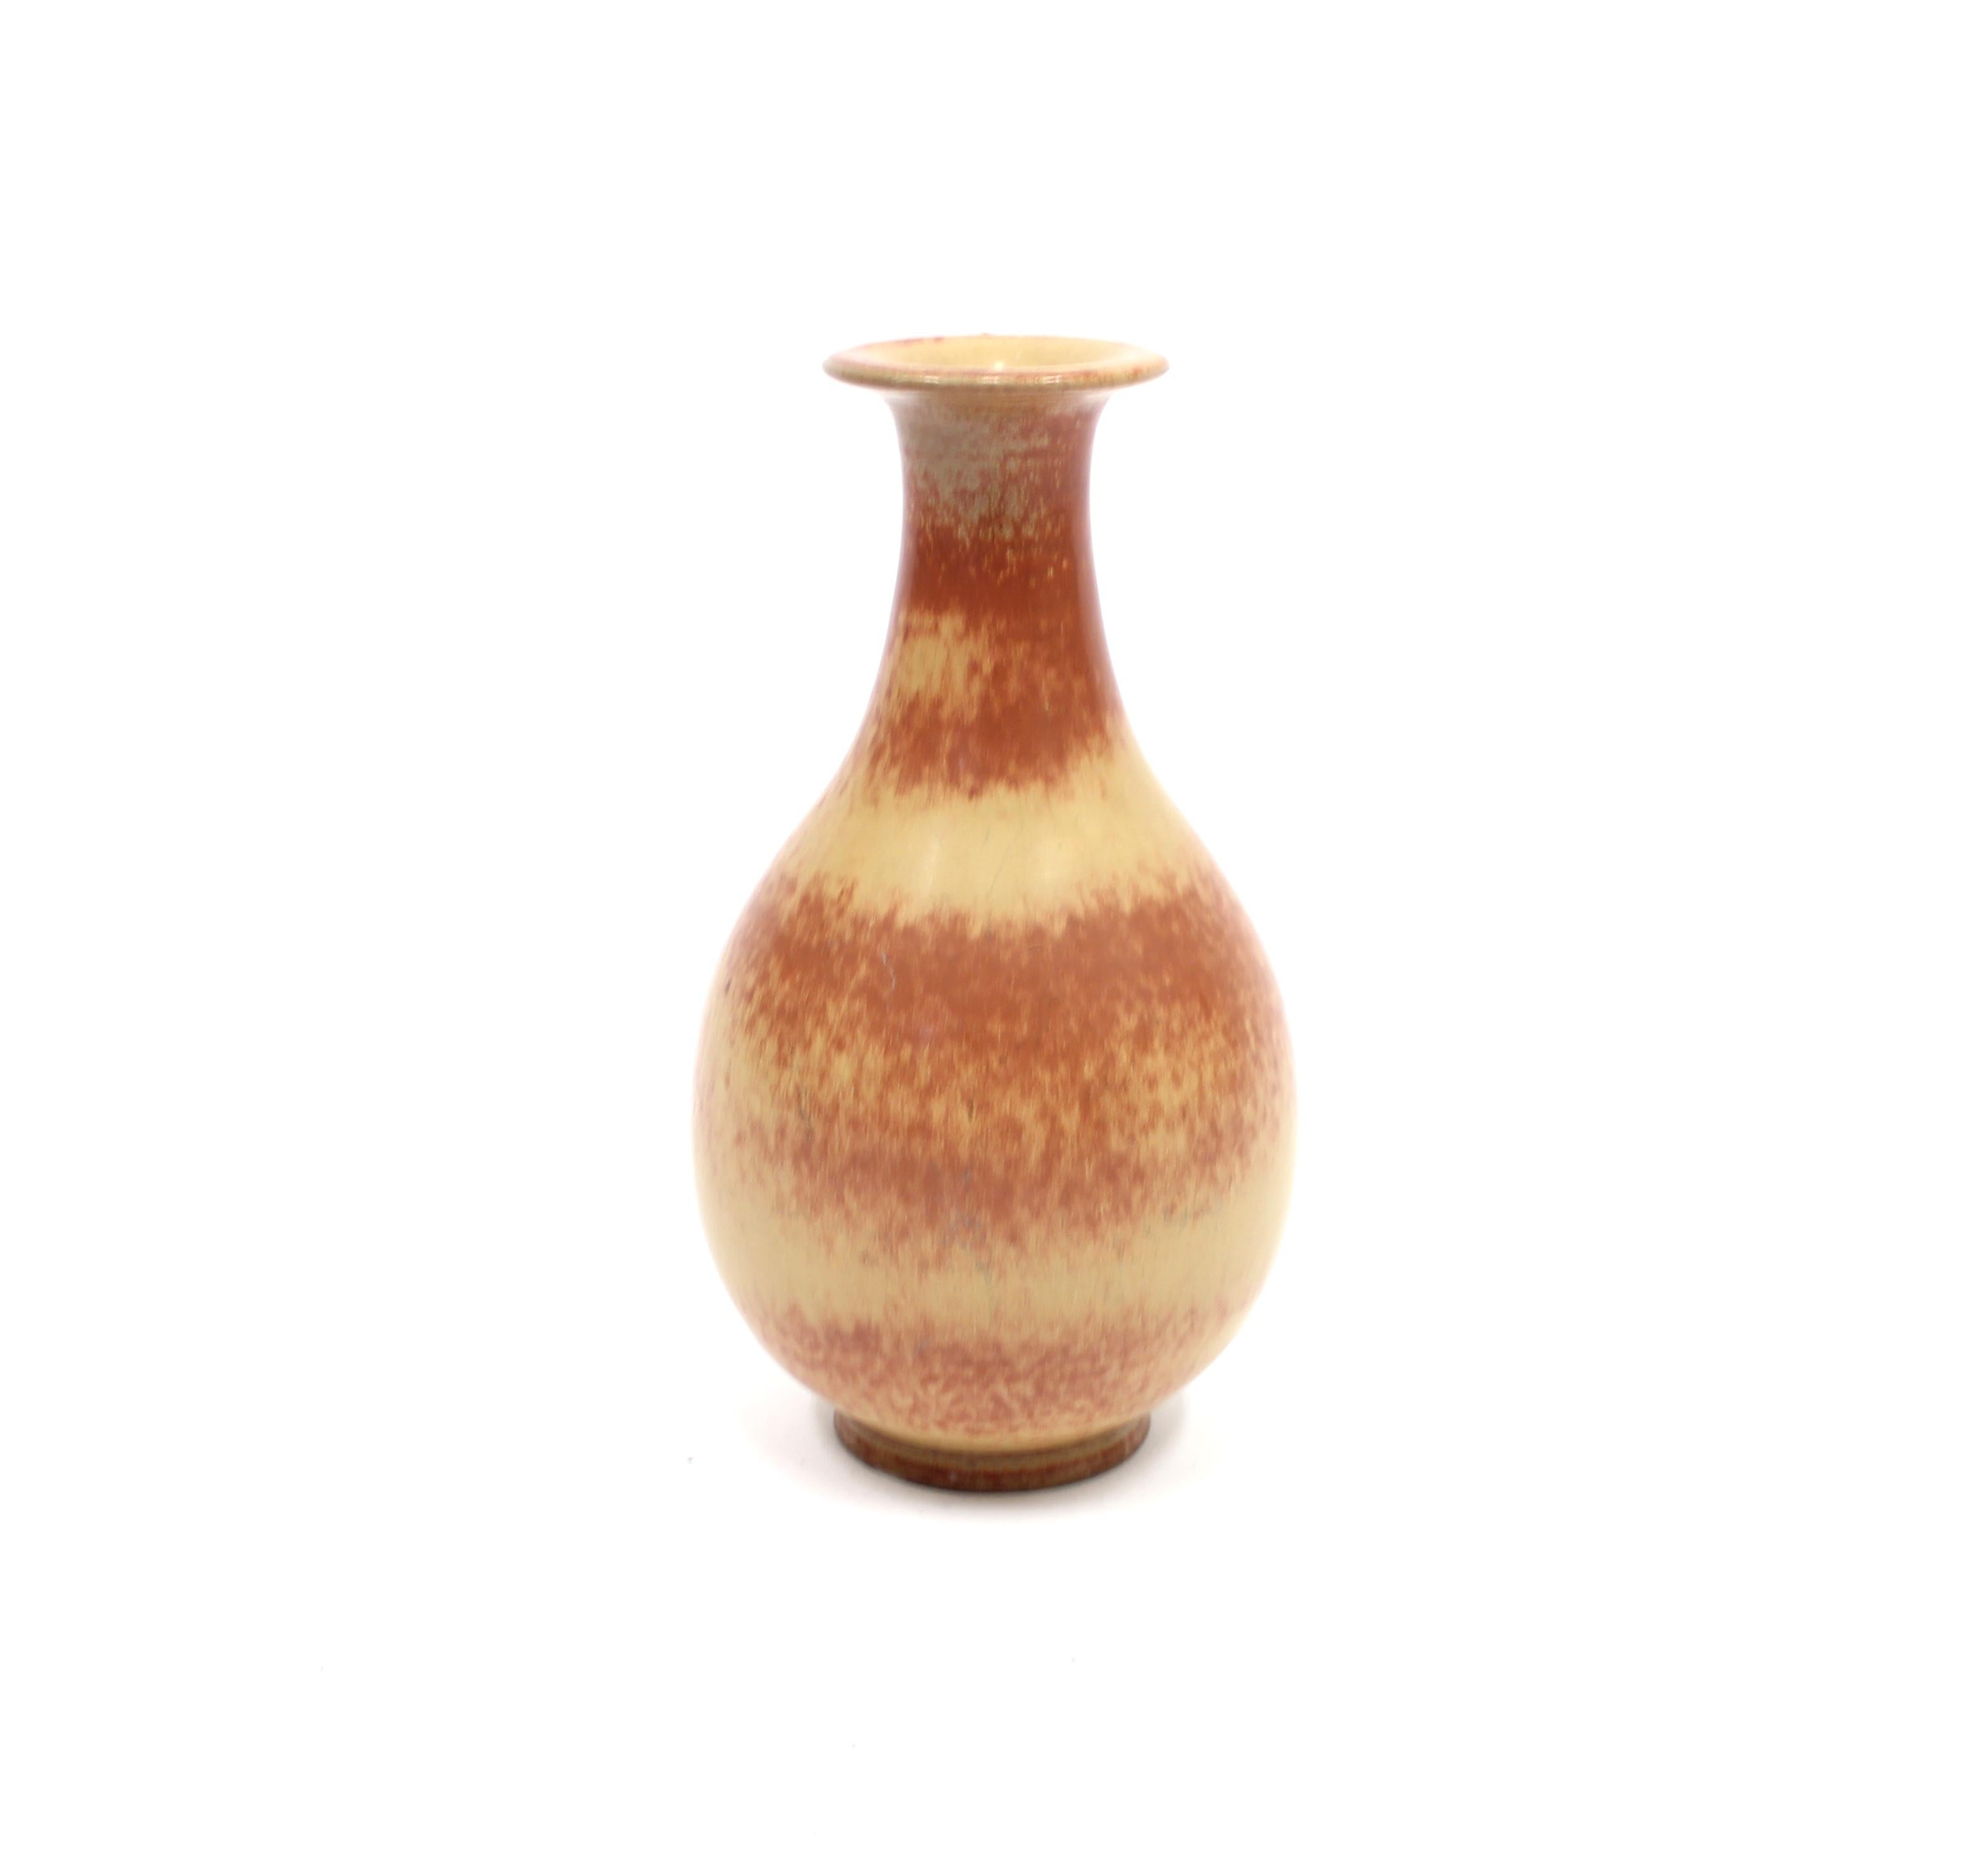 Yellow and red stoneware vase by Gunnar Nylund for Rörstrand, 1950s. Overall very good condition wit ware consistent with age and use. A few small shallow scratches and marks may occur. Very small manufacturing glaze defect on top.